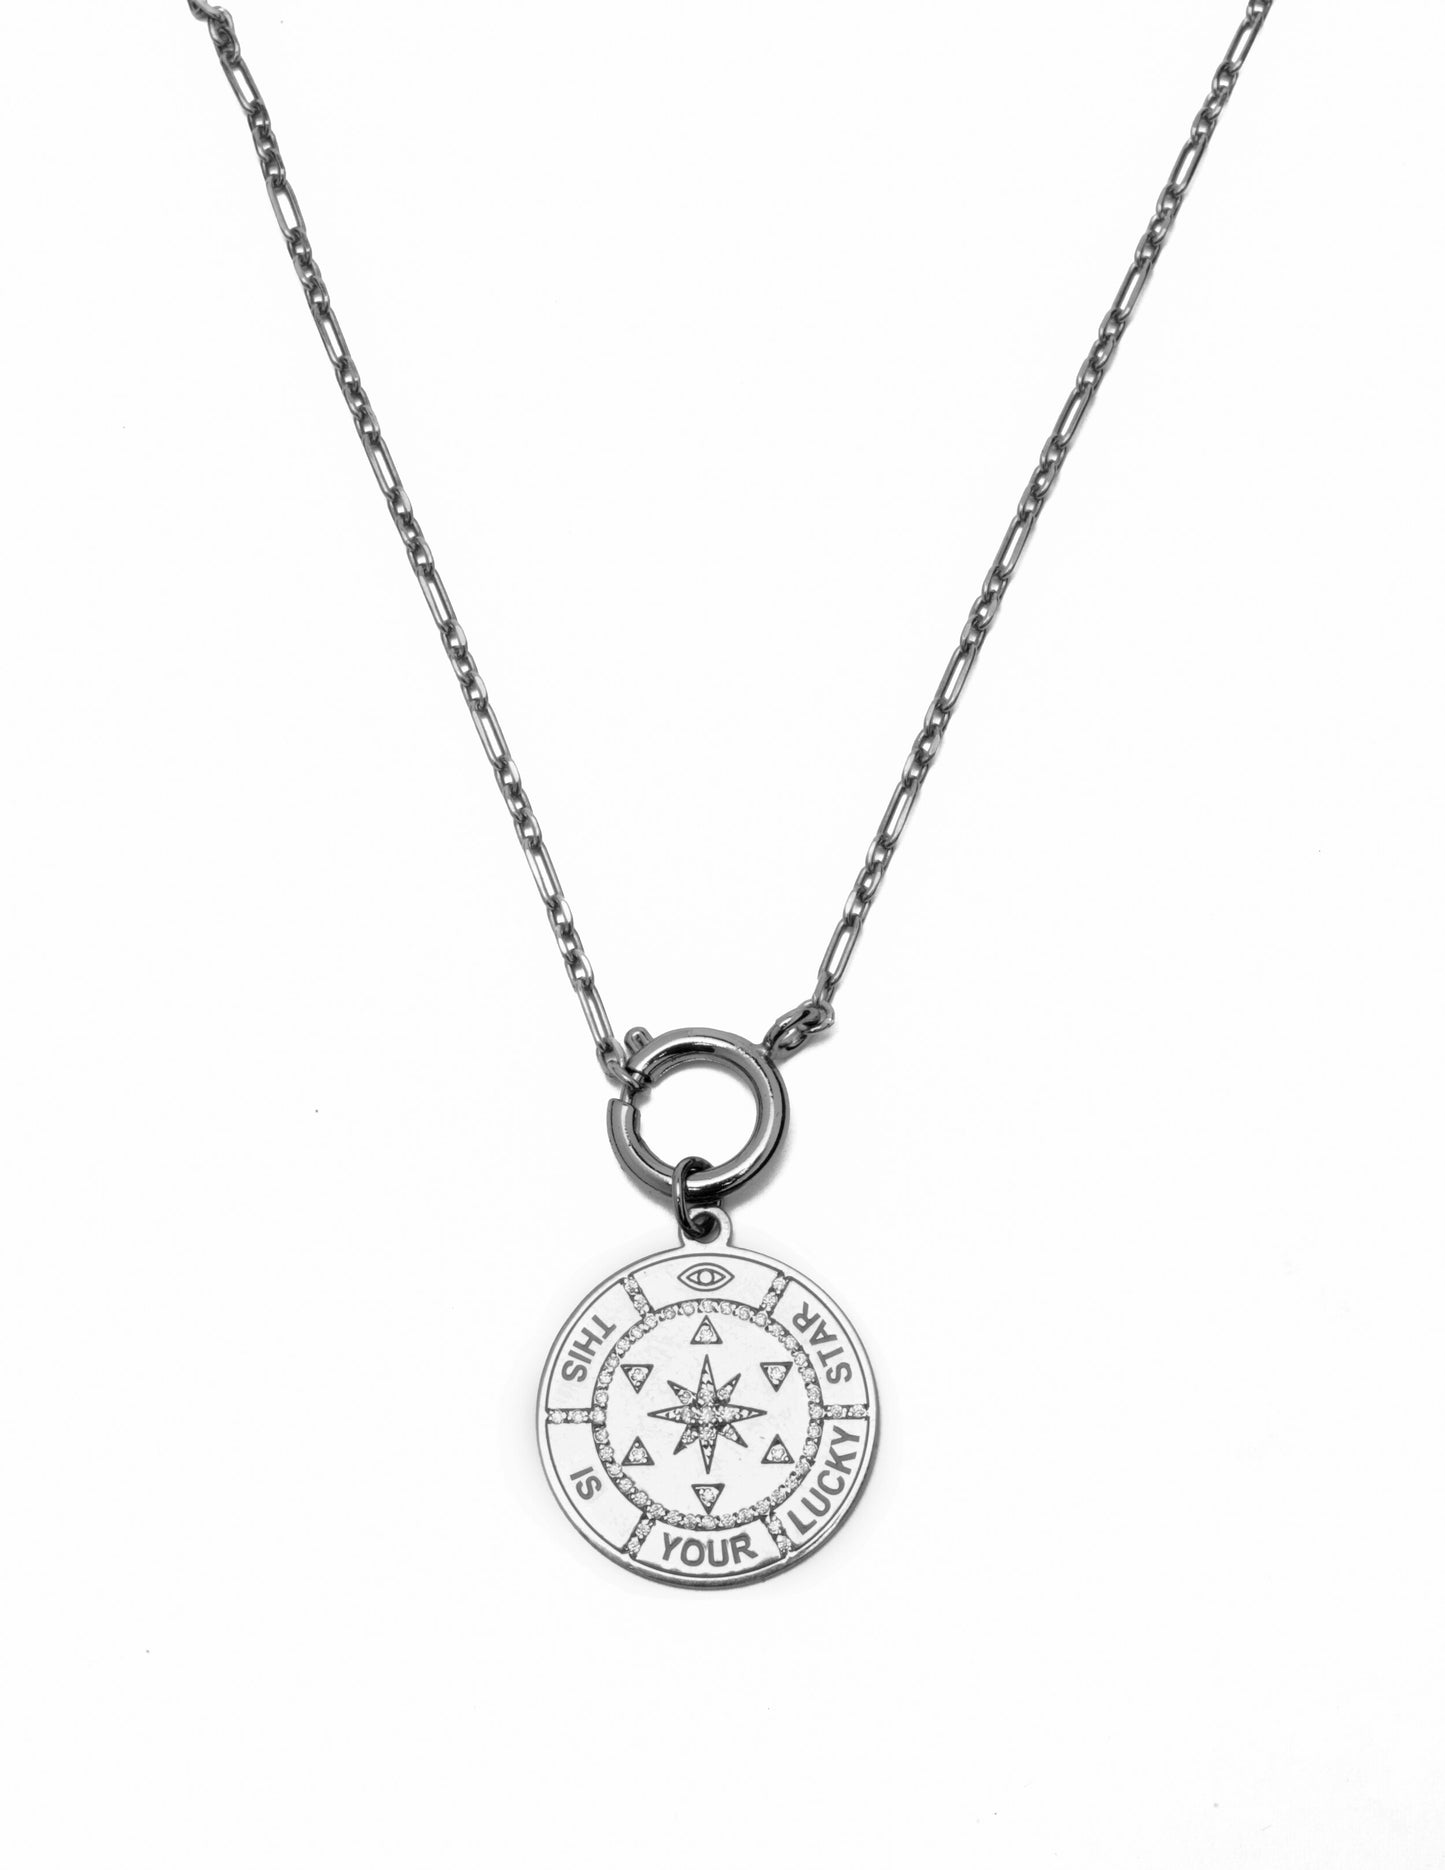 This is your lucky star necklace - Black Rhodium Plated